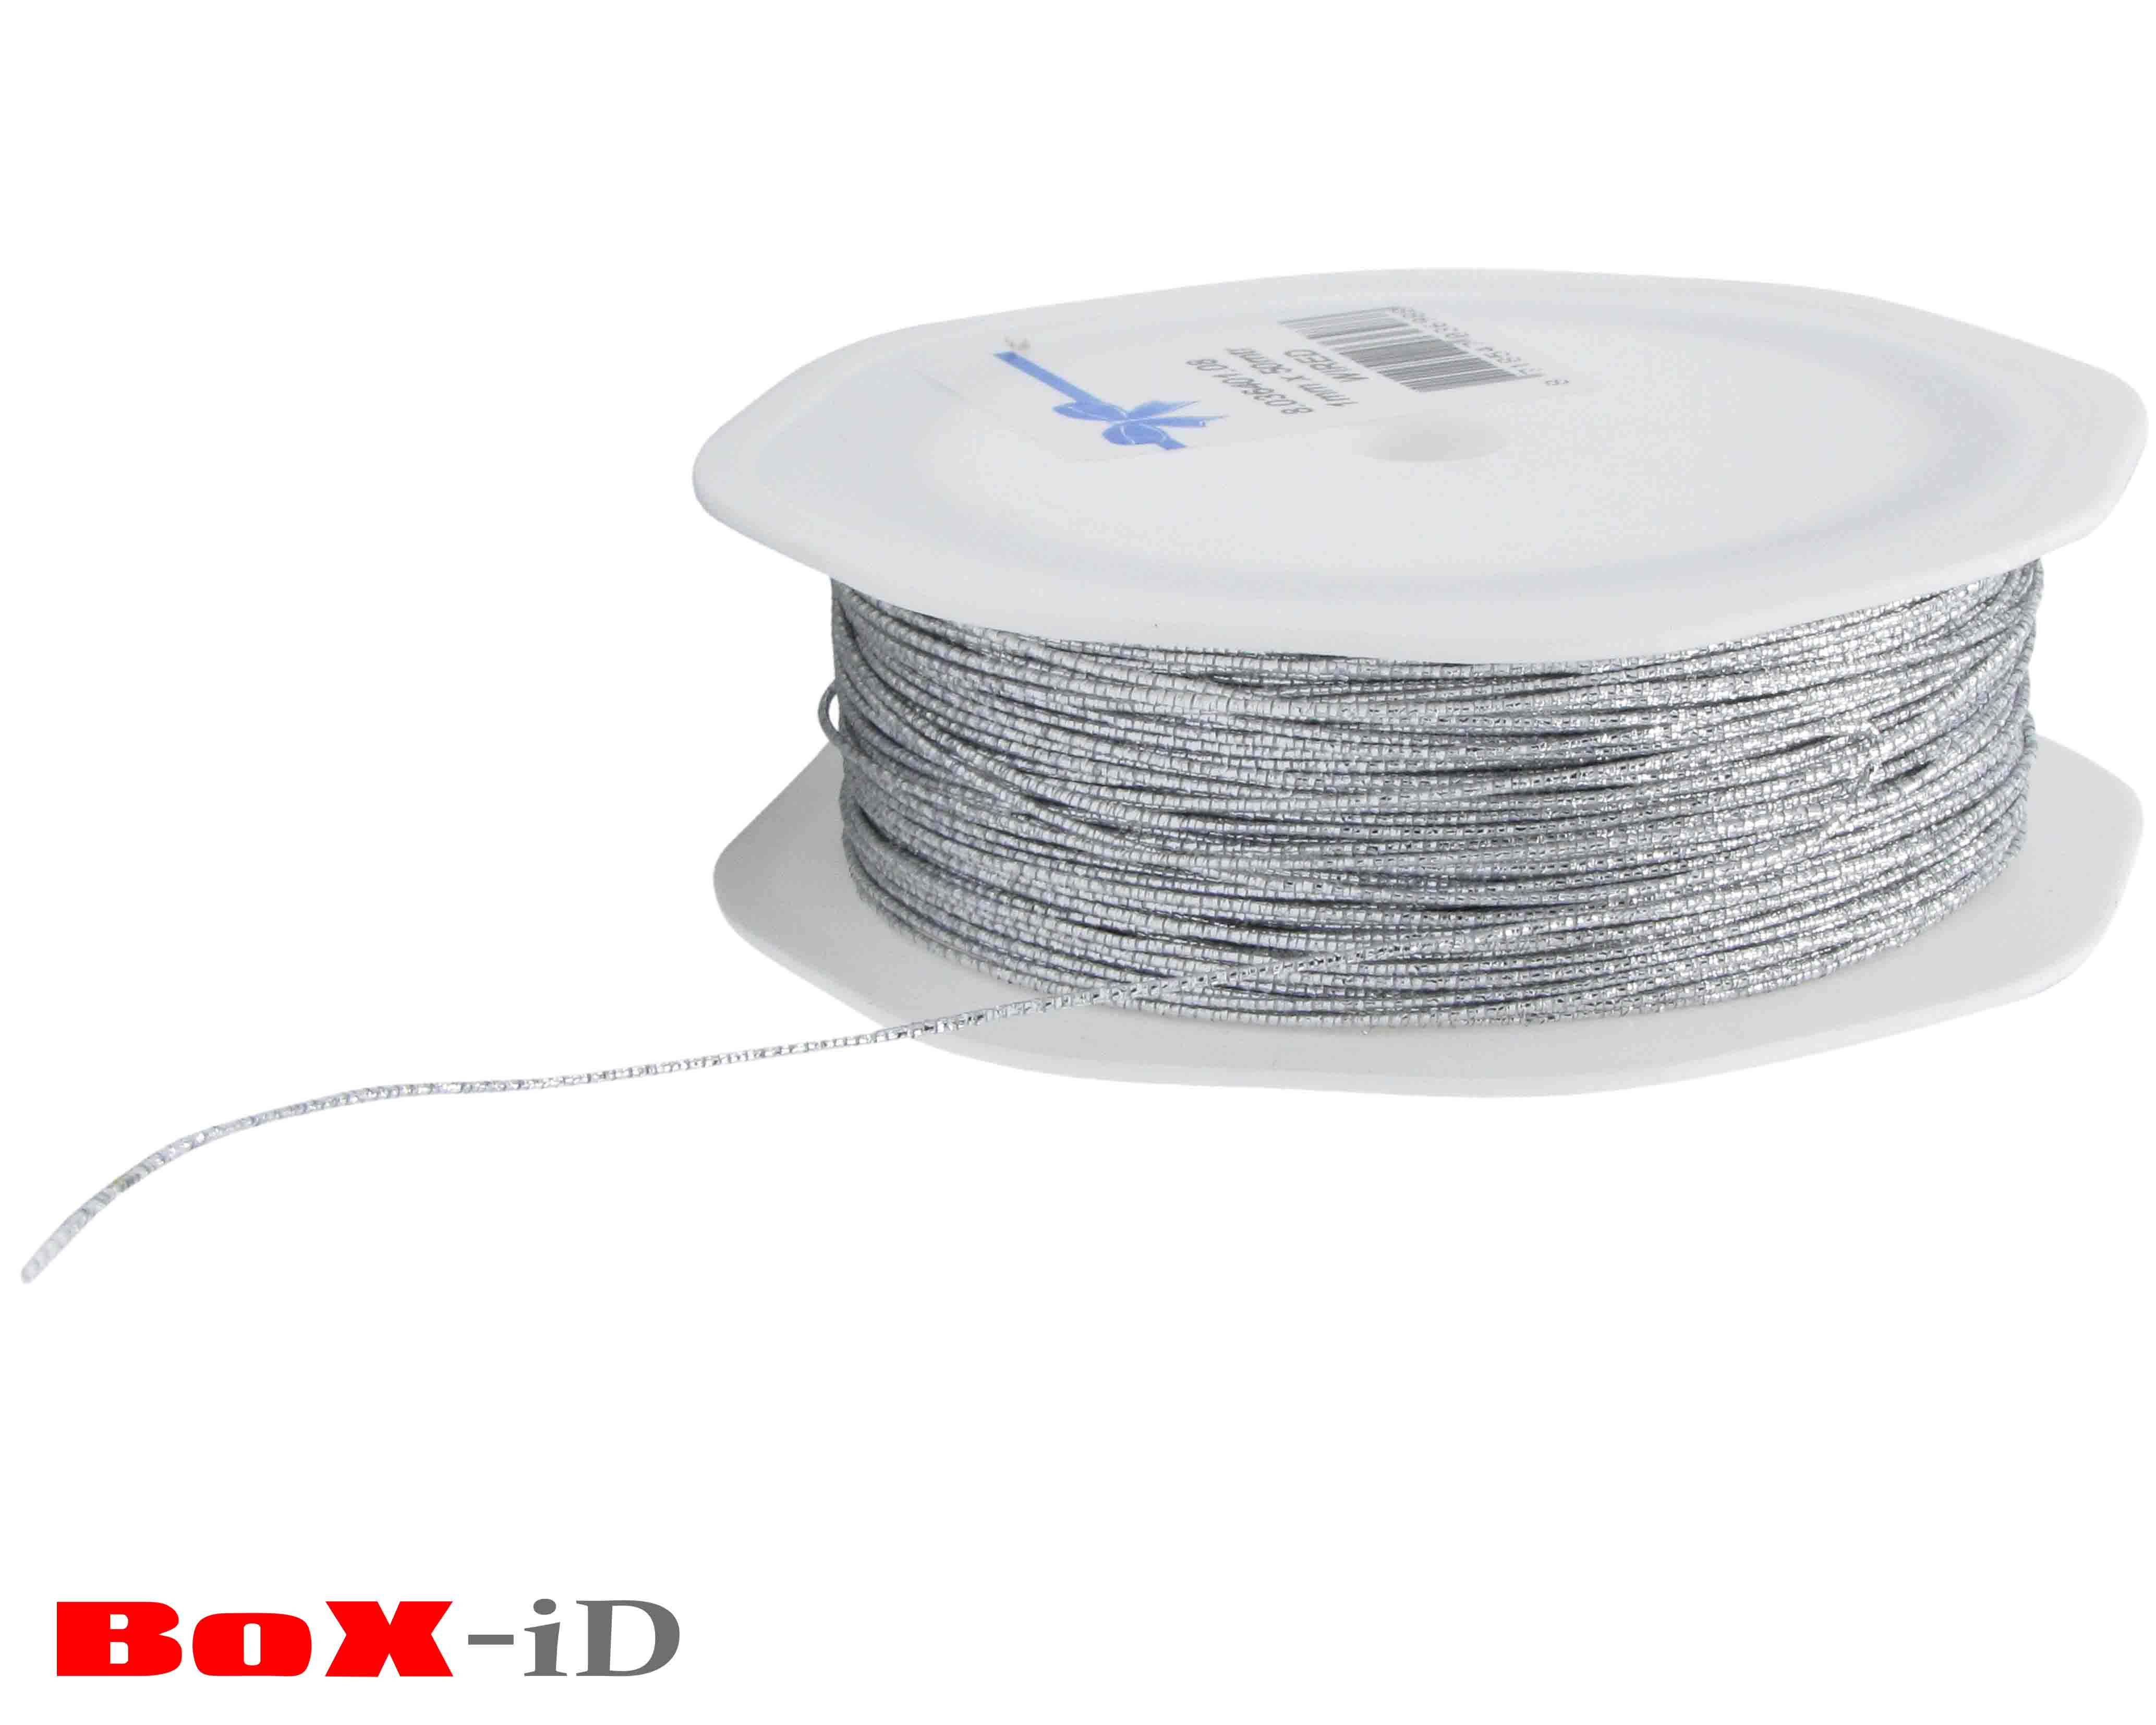 Metal cord wired zilver 1mm x 50m